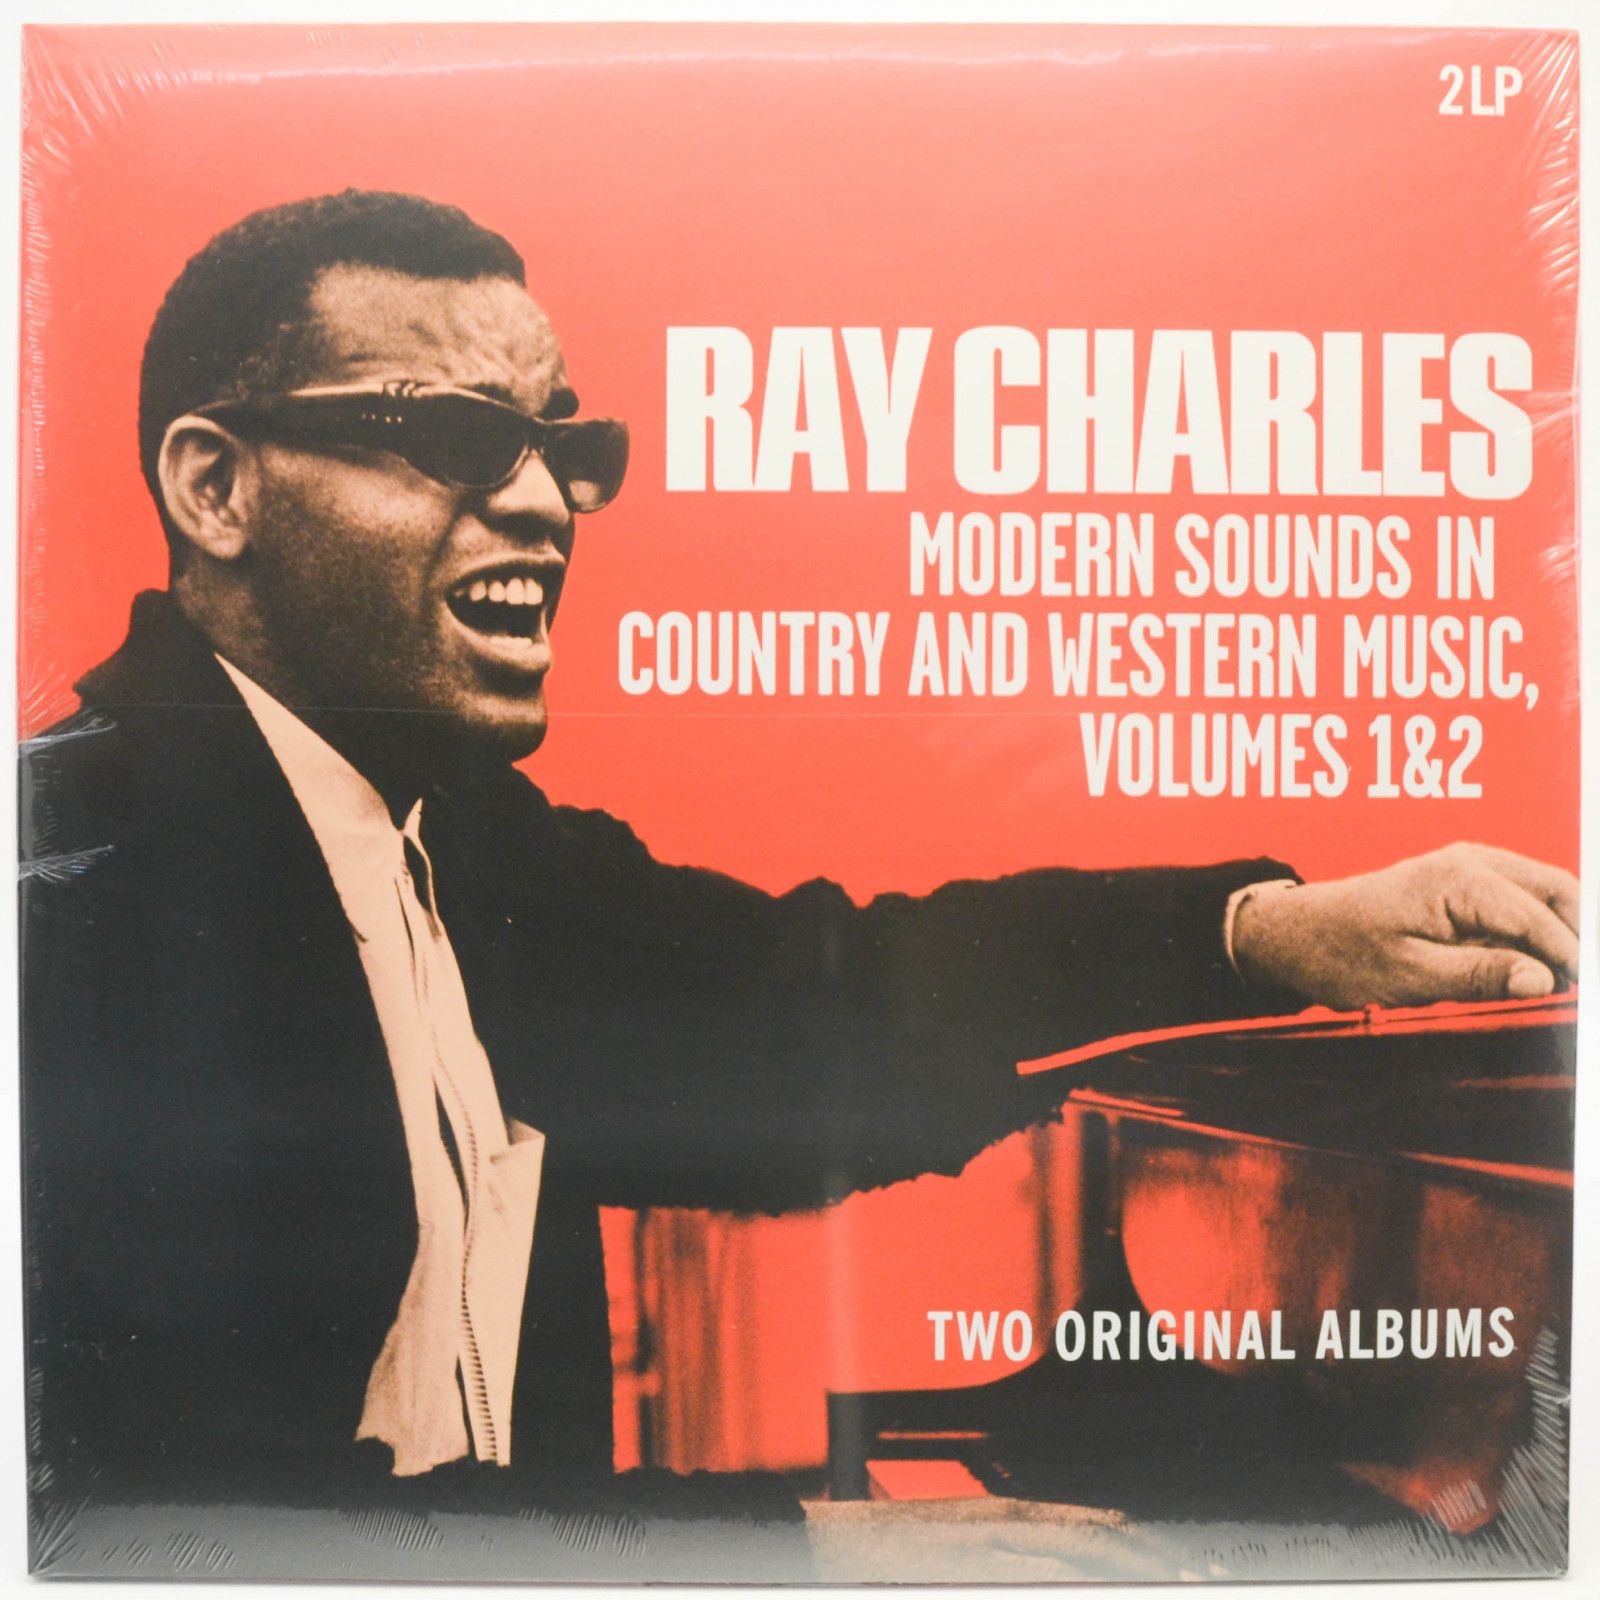 Ray Charles — Modern Sounds In Country And Western Music, Volumes 1&2 (2LP), 2009